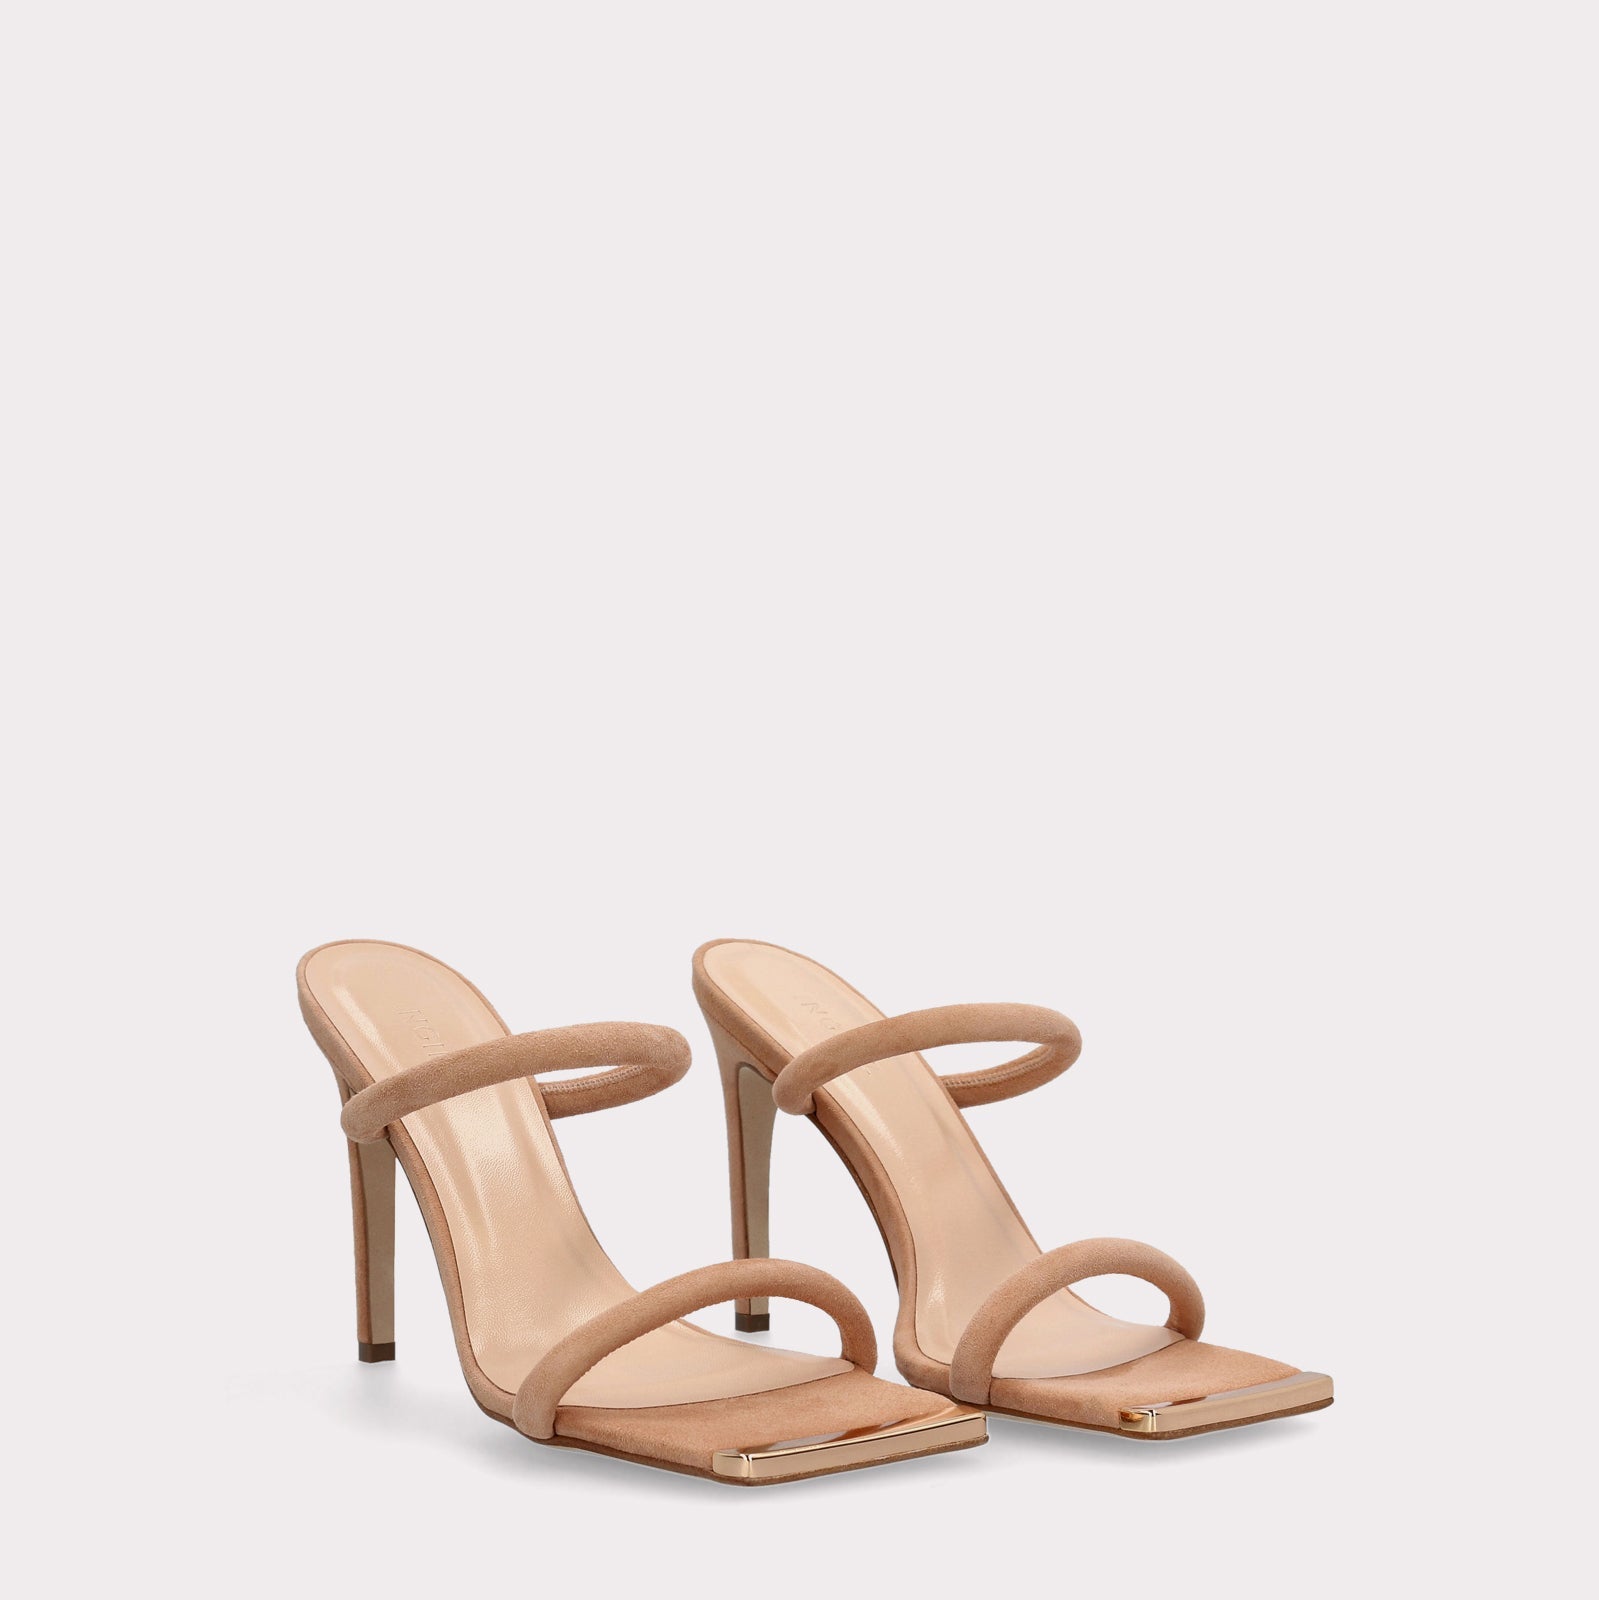 KATERINA NUDE SUEDE LEATHER MULES